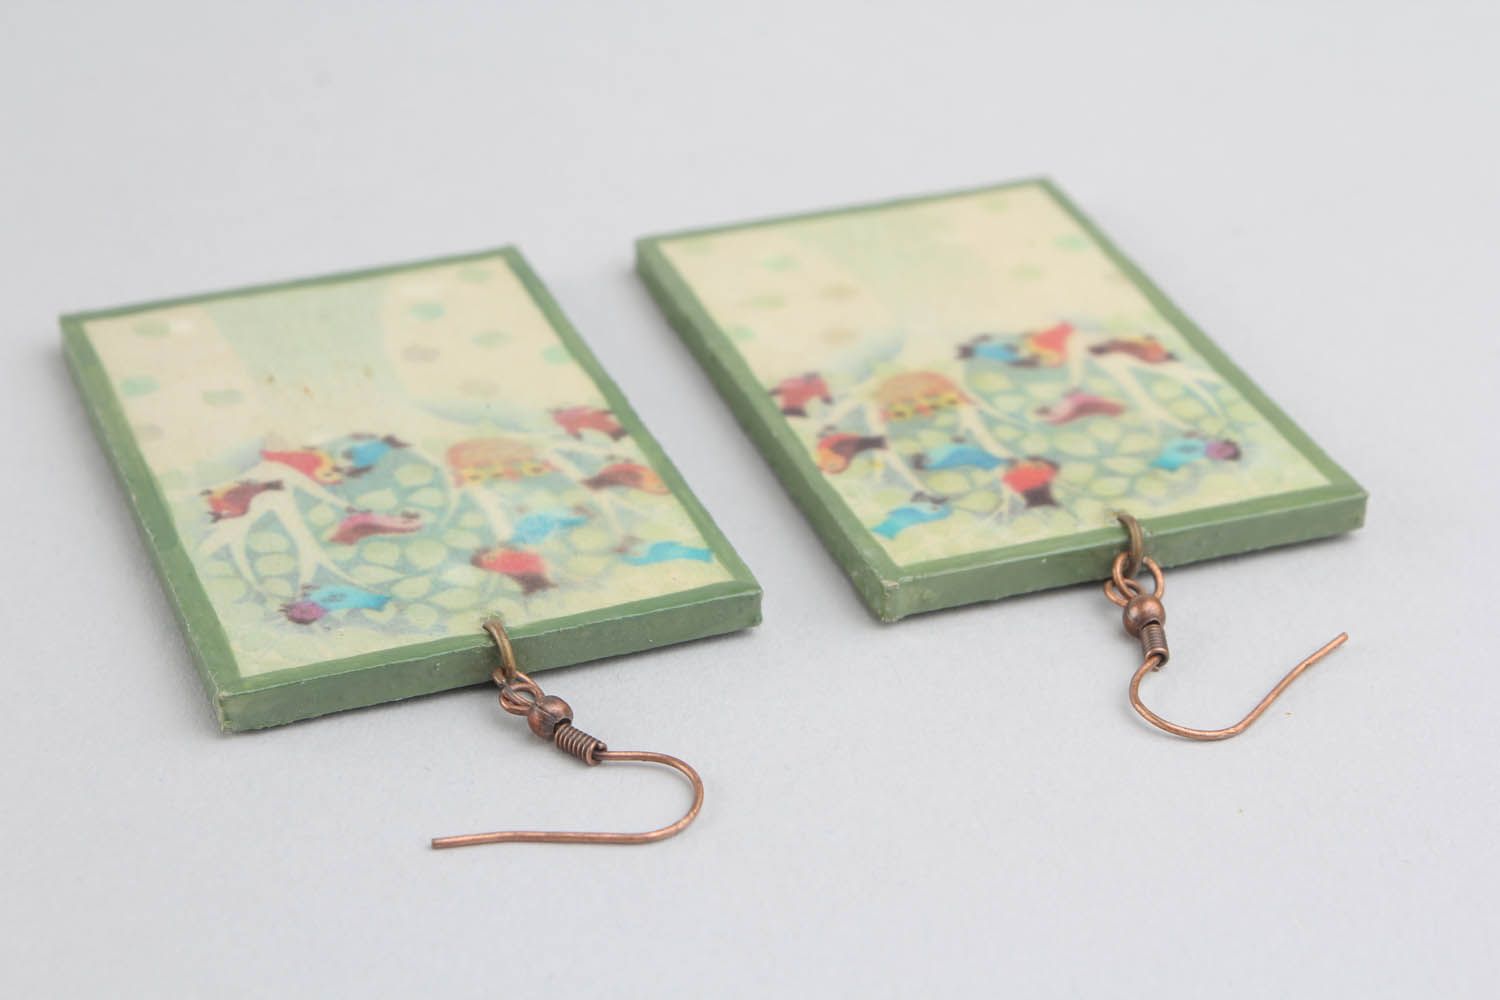 Earrings made of wood and epoxy resin photo 3